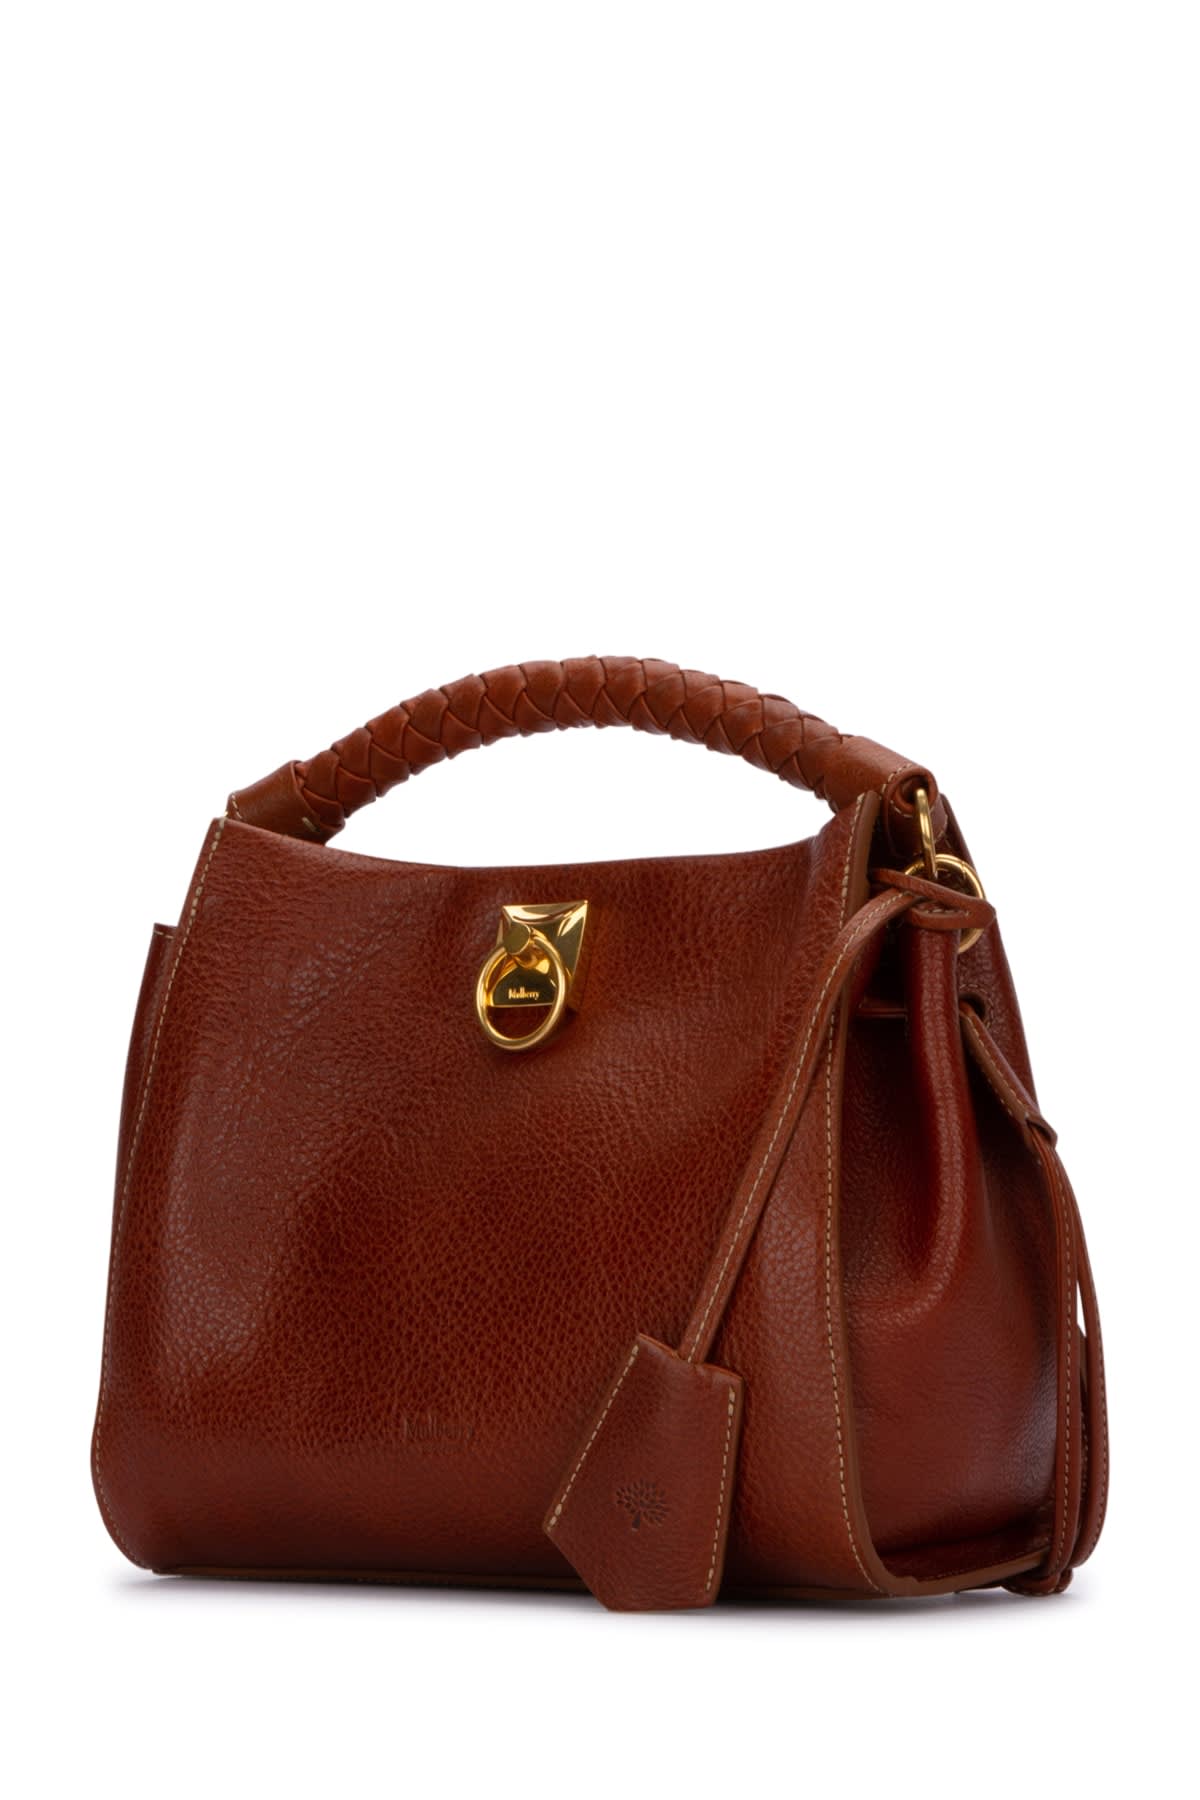 Shop Mulberry Borsa In G110